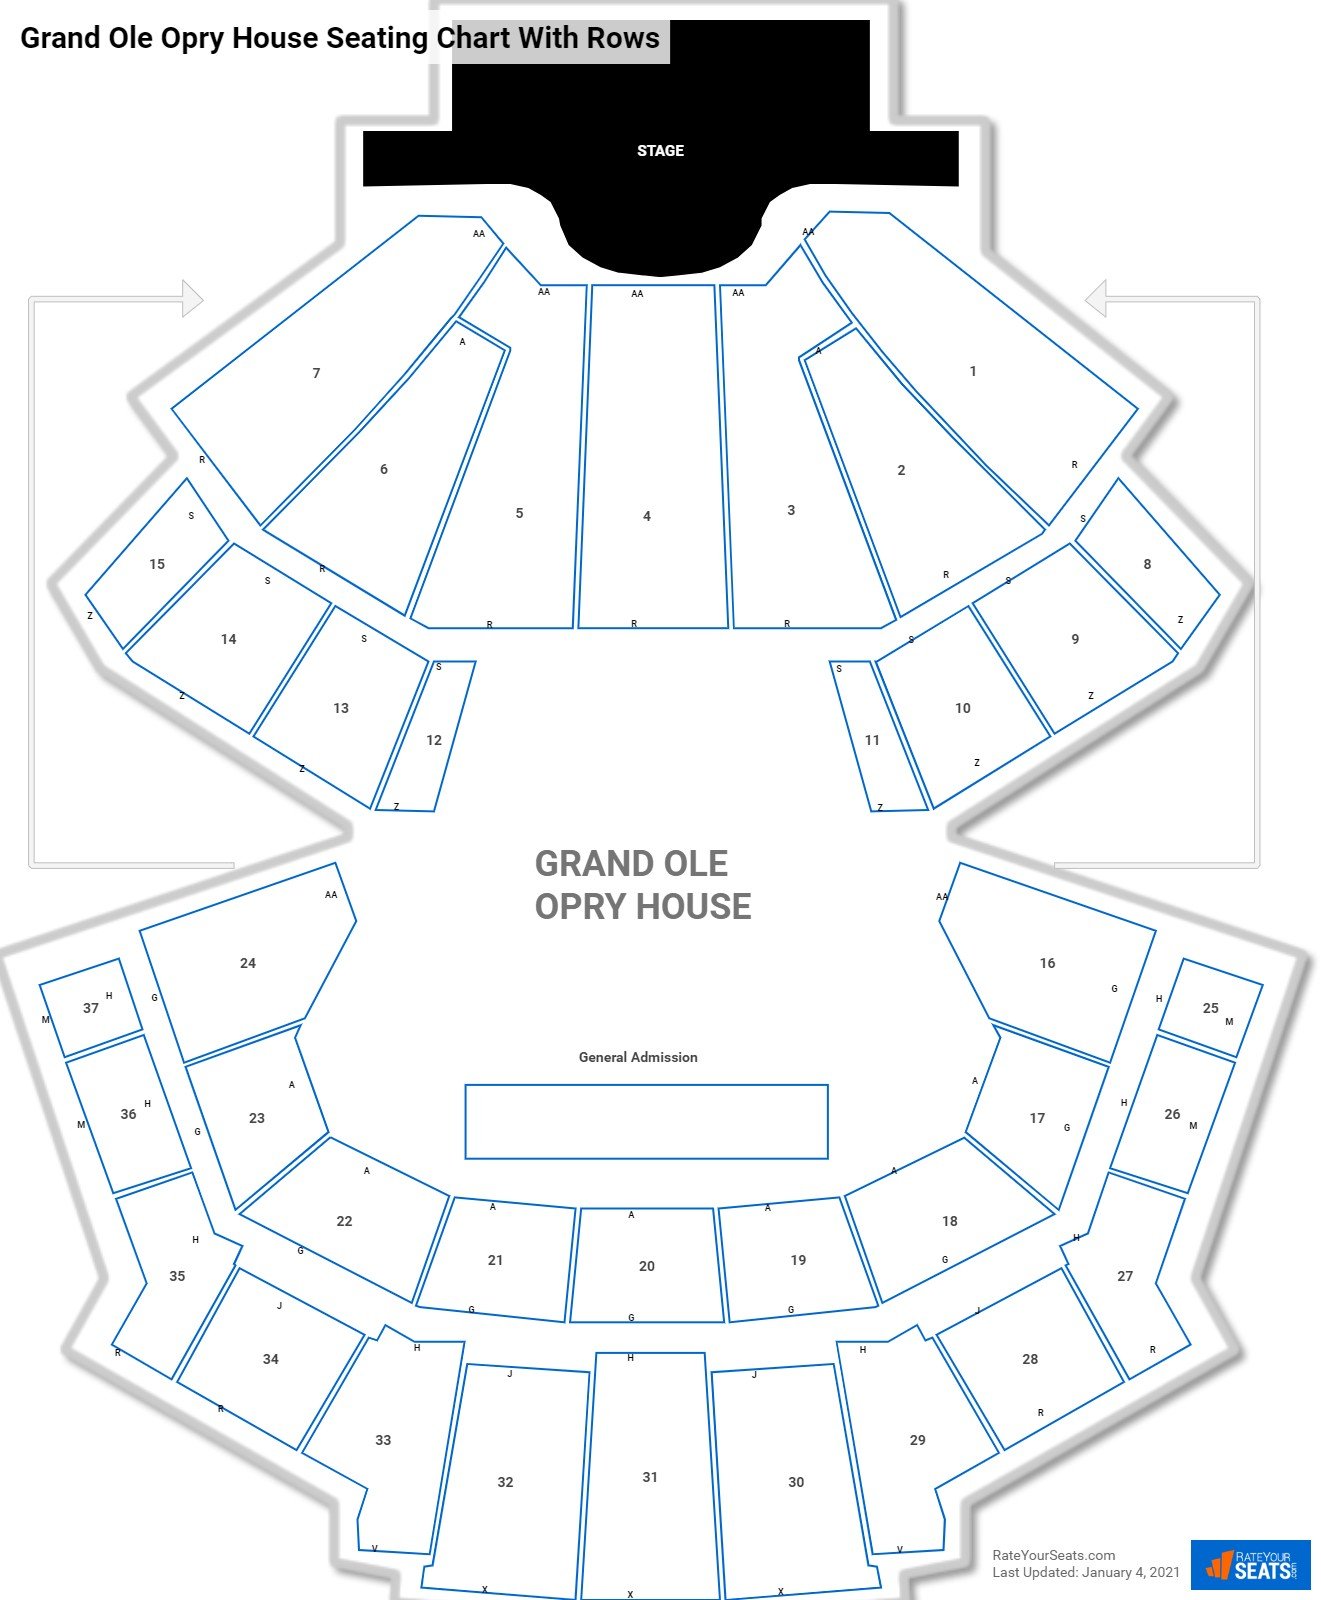 Grand Ole Opry House seating chart with row numbers